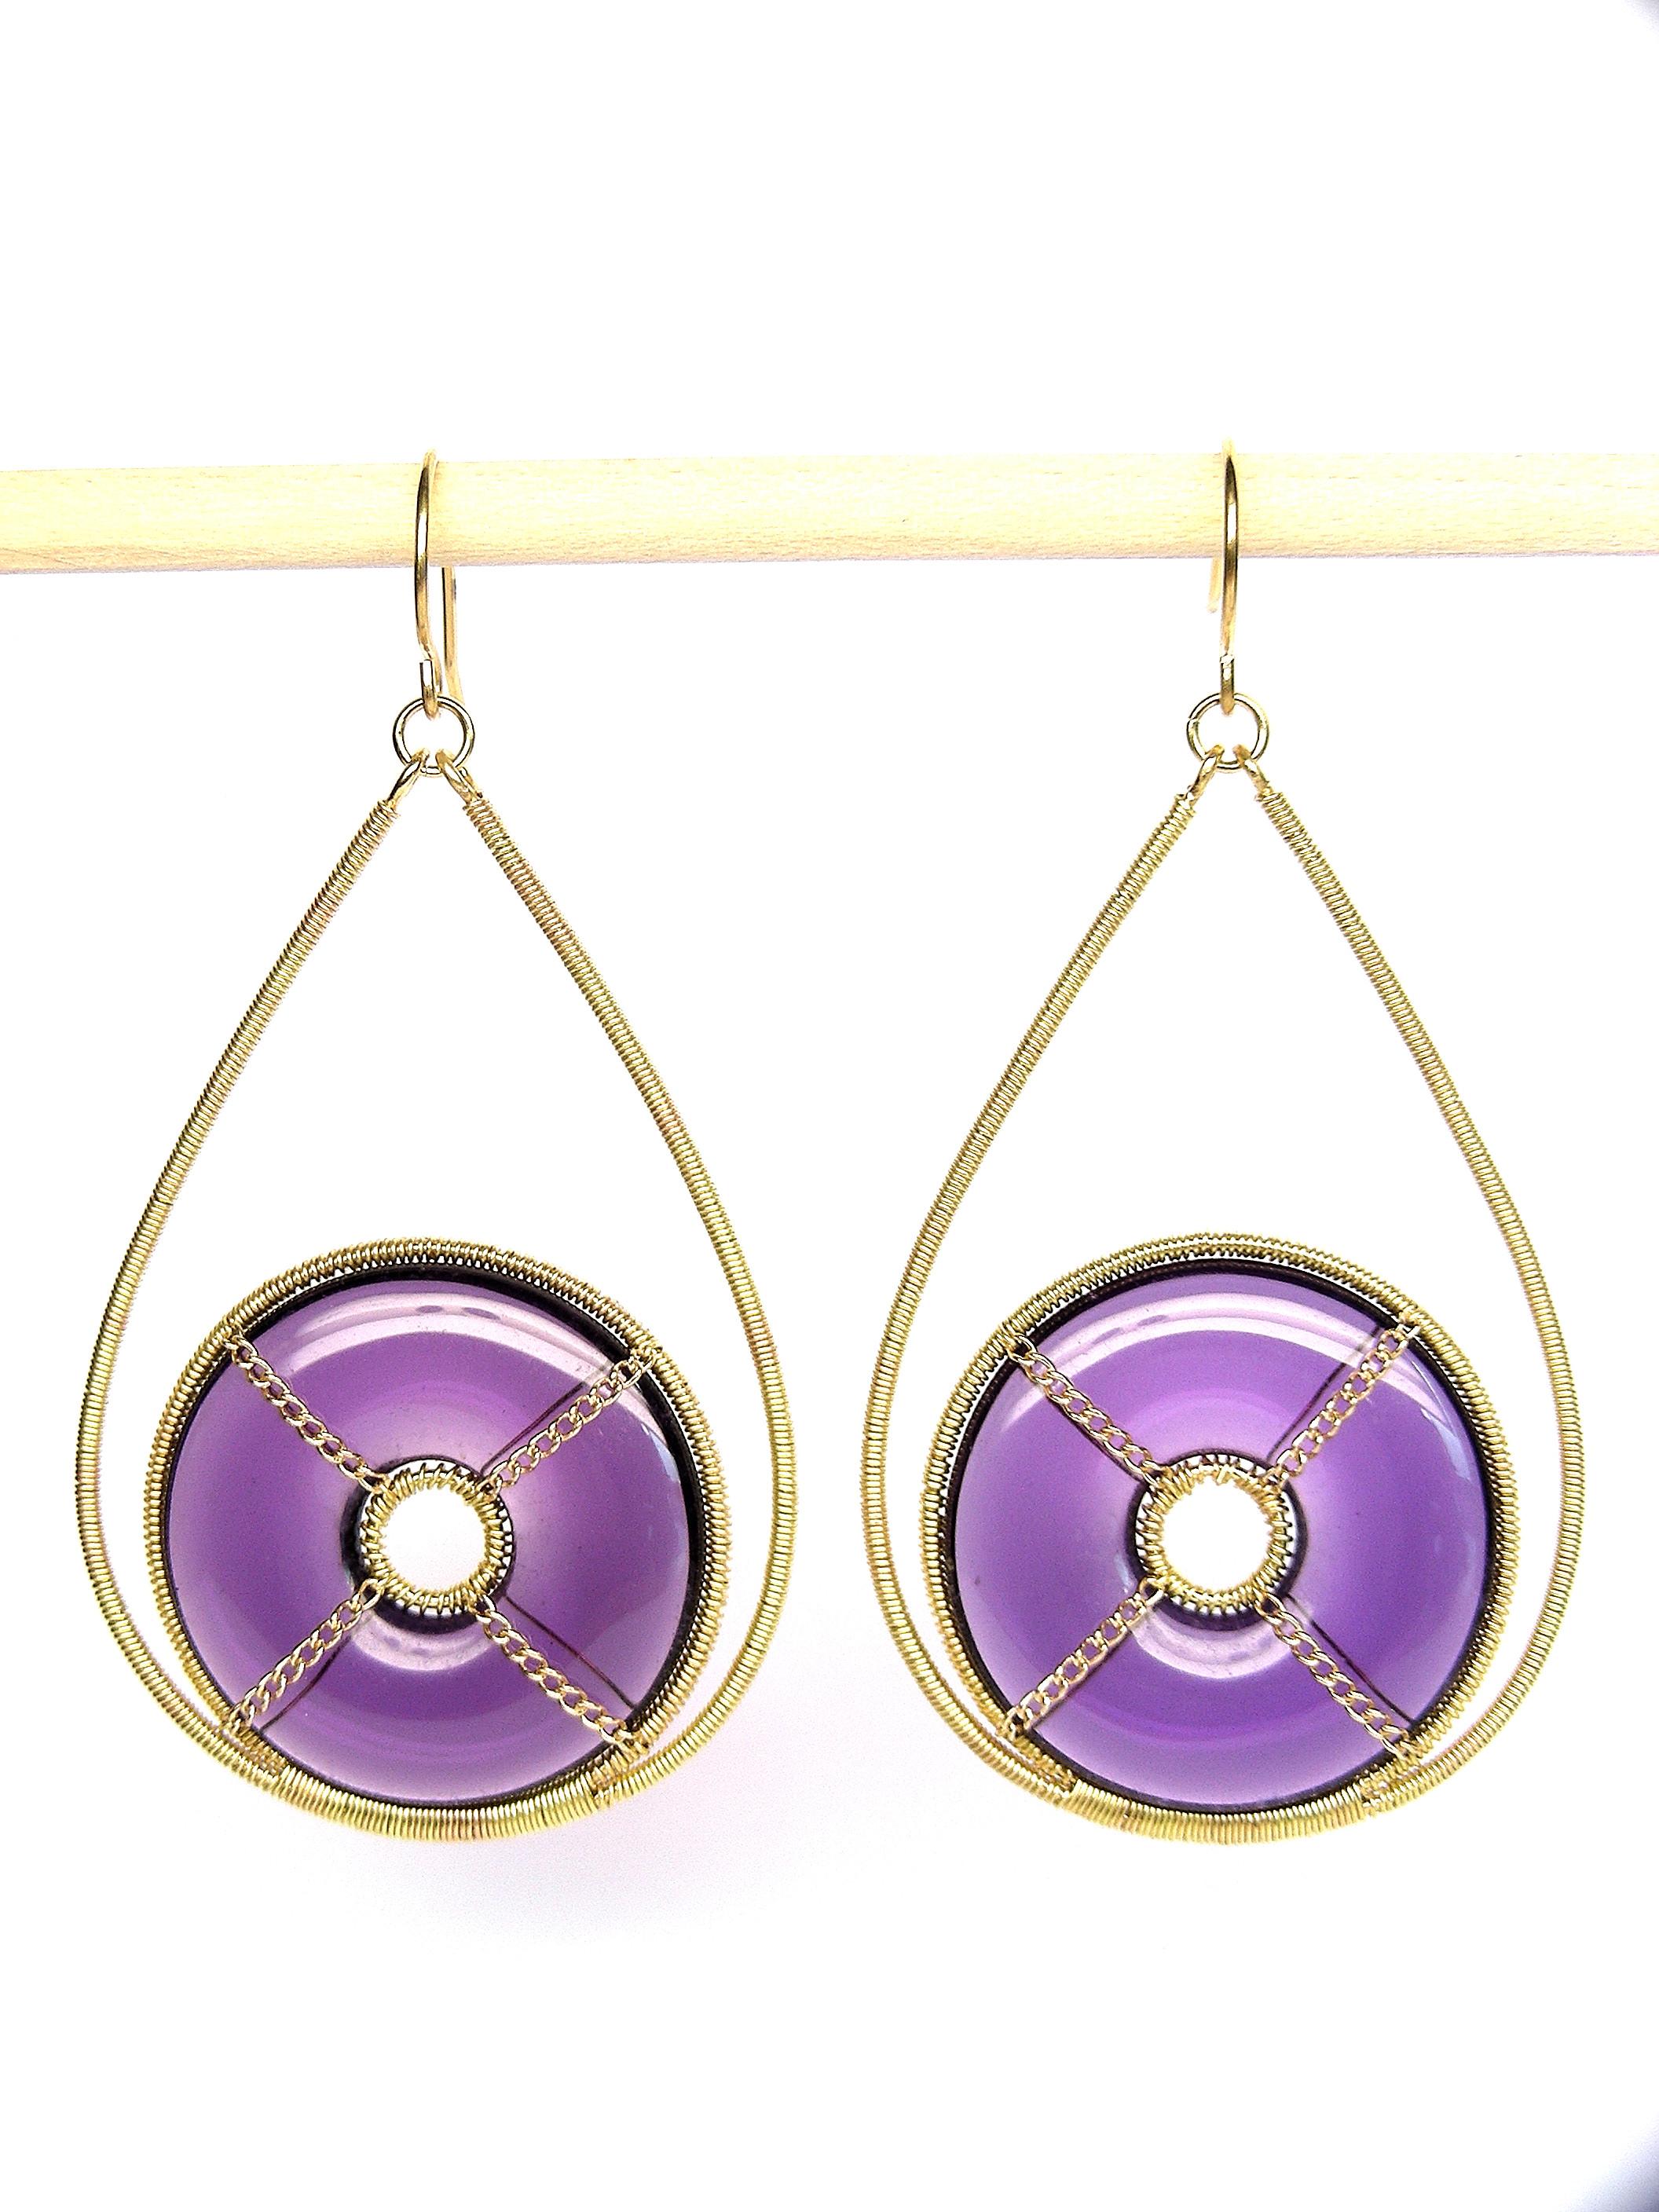 Hoop 18k Yellow Gold Earrings with Violet ametyst crystals and black onyx
Summer Splash is a collection of easy to wear, fashion oriented hoop earrings to wear with lightness, chic and glam only this pieces for this collection 
They come in 6